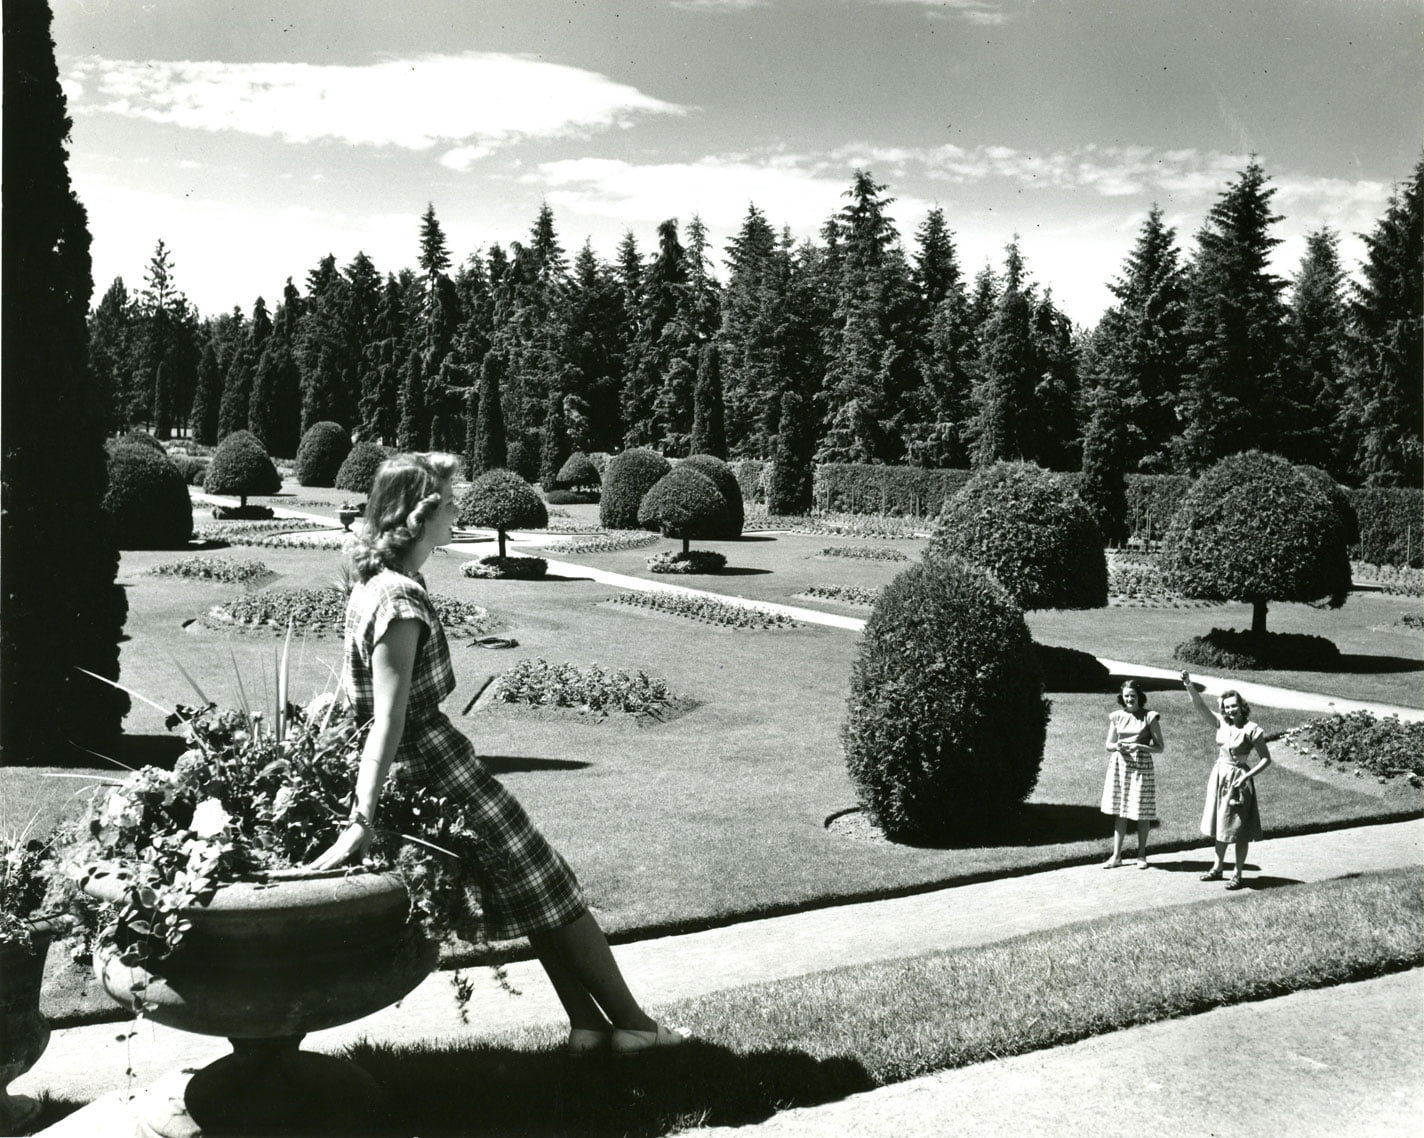 Title: Manito Park, Spokane, Date: 1940-1980, Photographer: Dyke, Walt, State Library Photograph Collection, 1851-1990, Washington State Archives, Digital Archives, http://www.digitalarchives.wa.gov, 04/04/2014. 